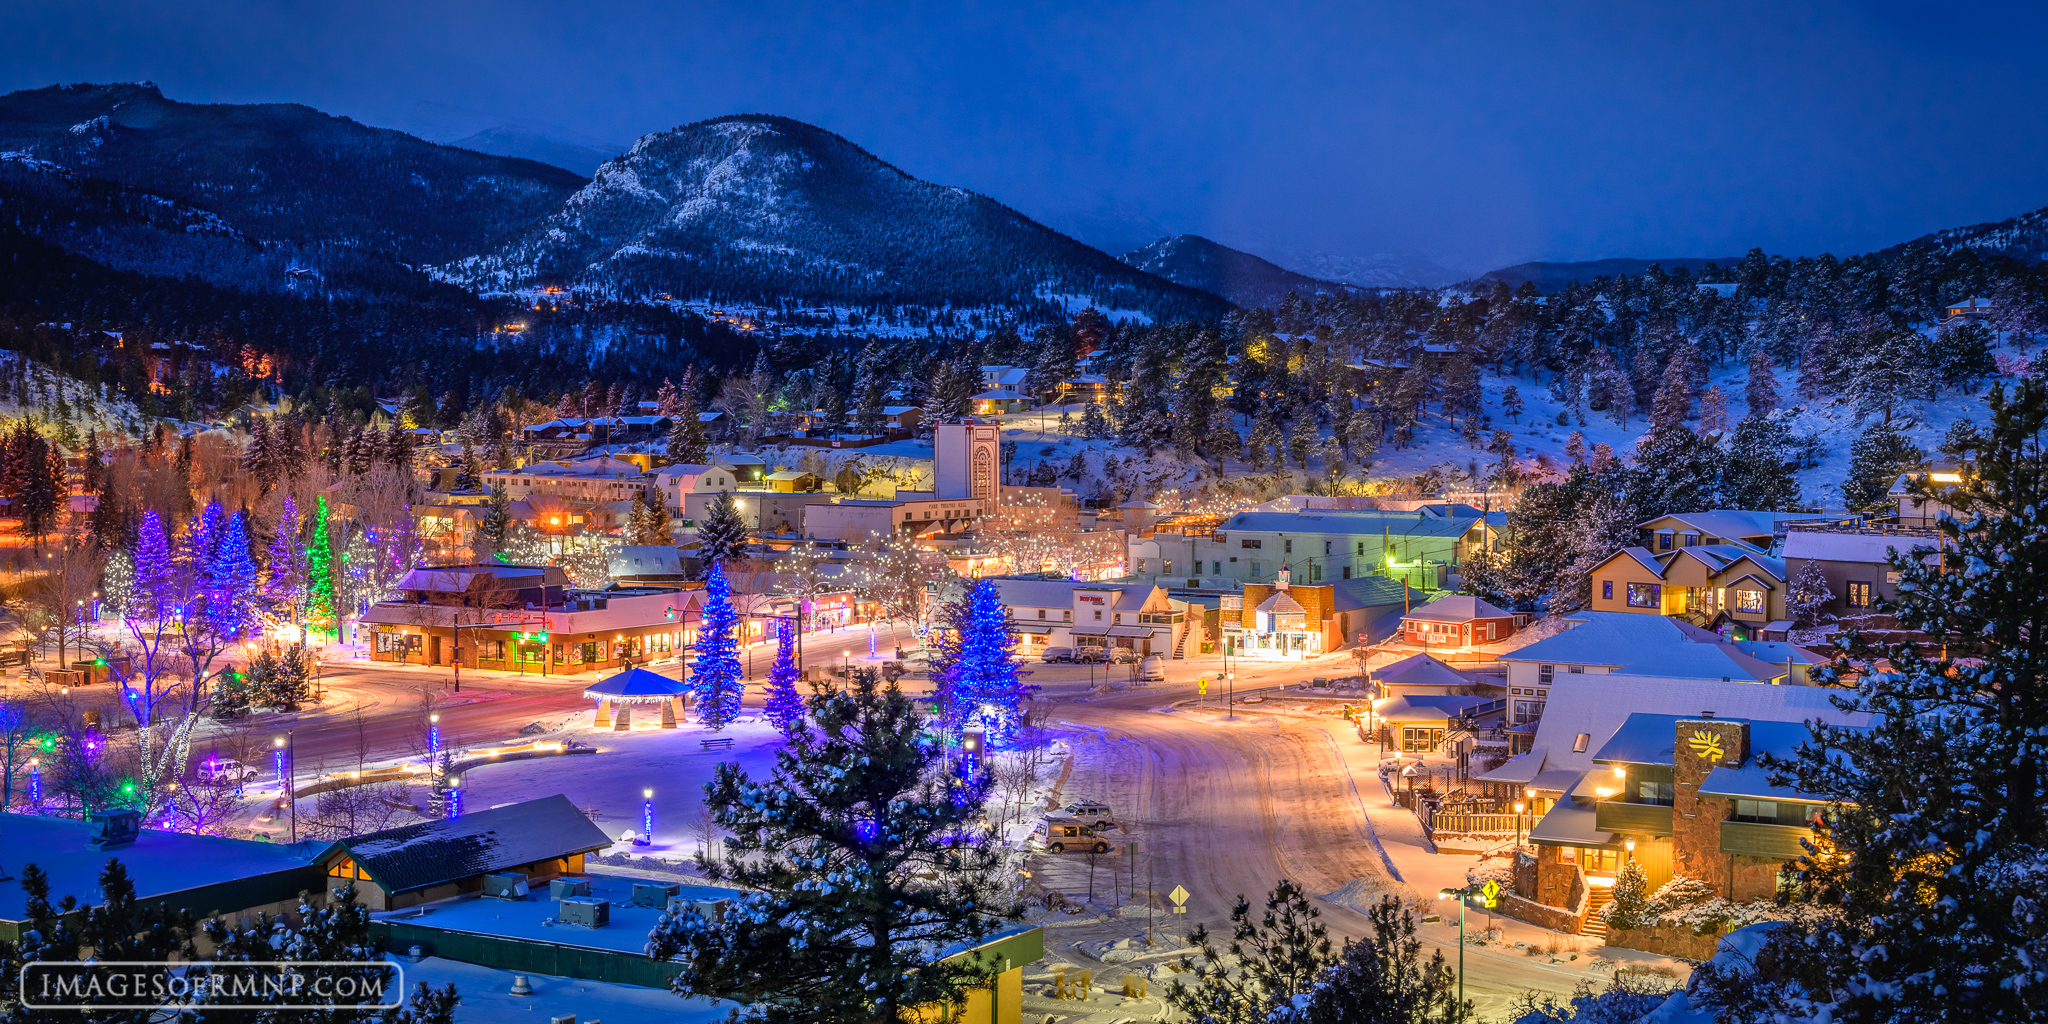 Every December the town of Estes Park, at the edge of Rocky Mountain National Park, goes to great effort to beautifully light...